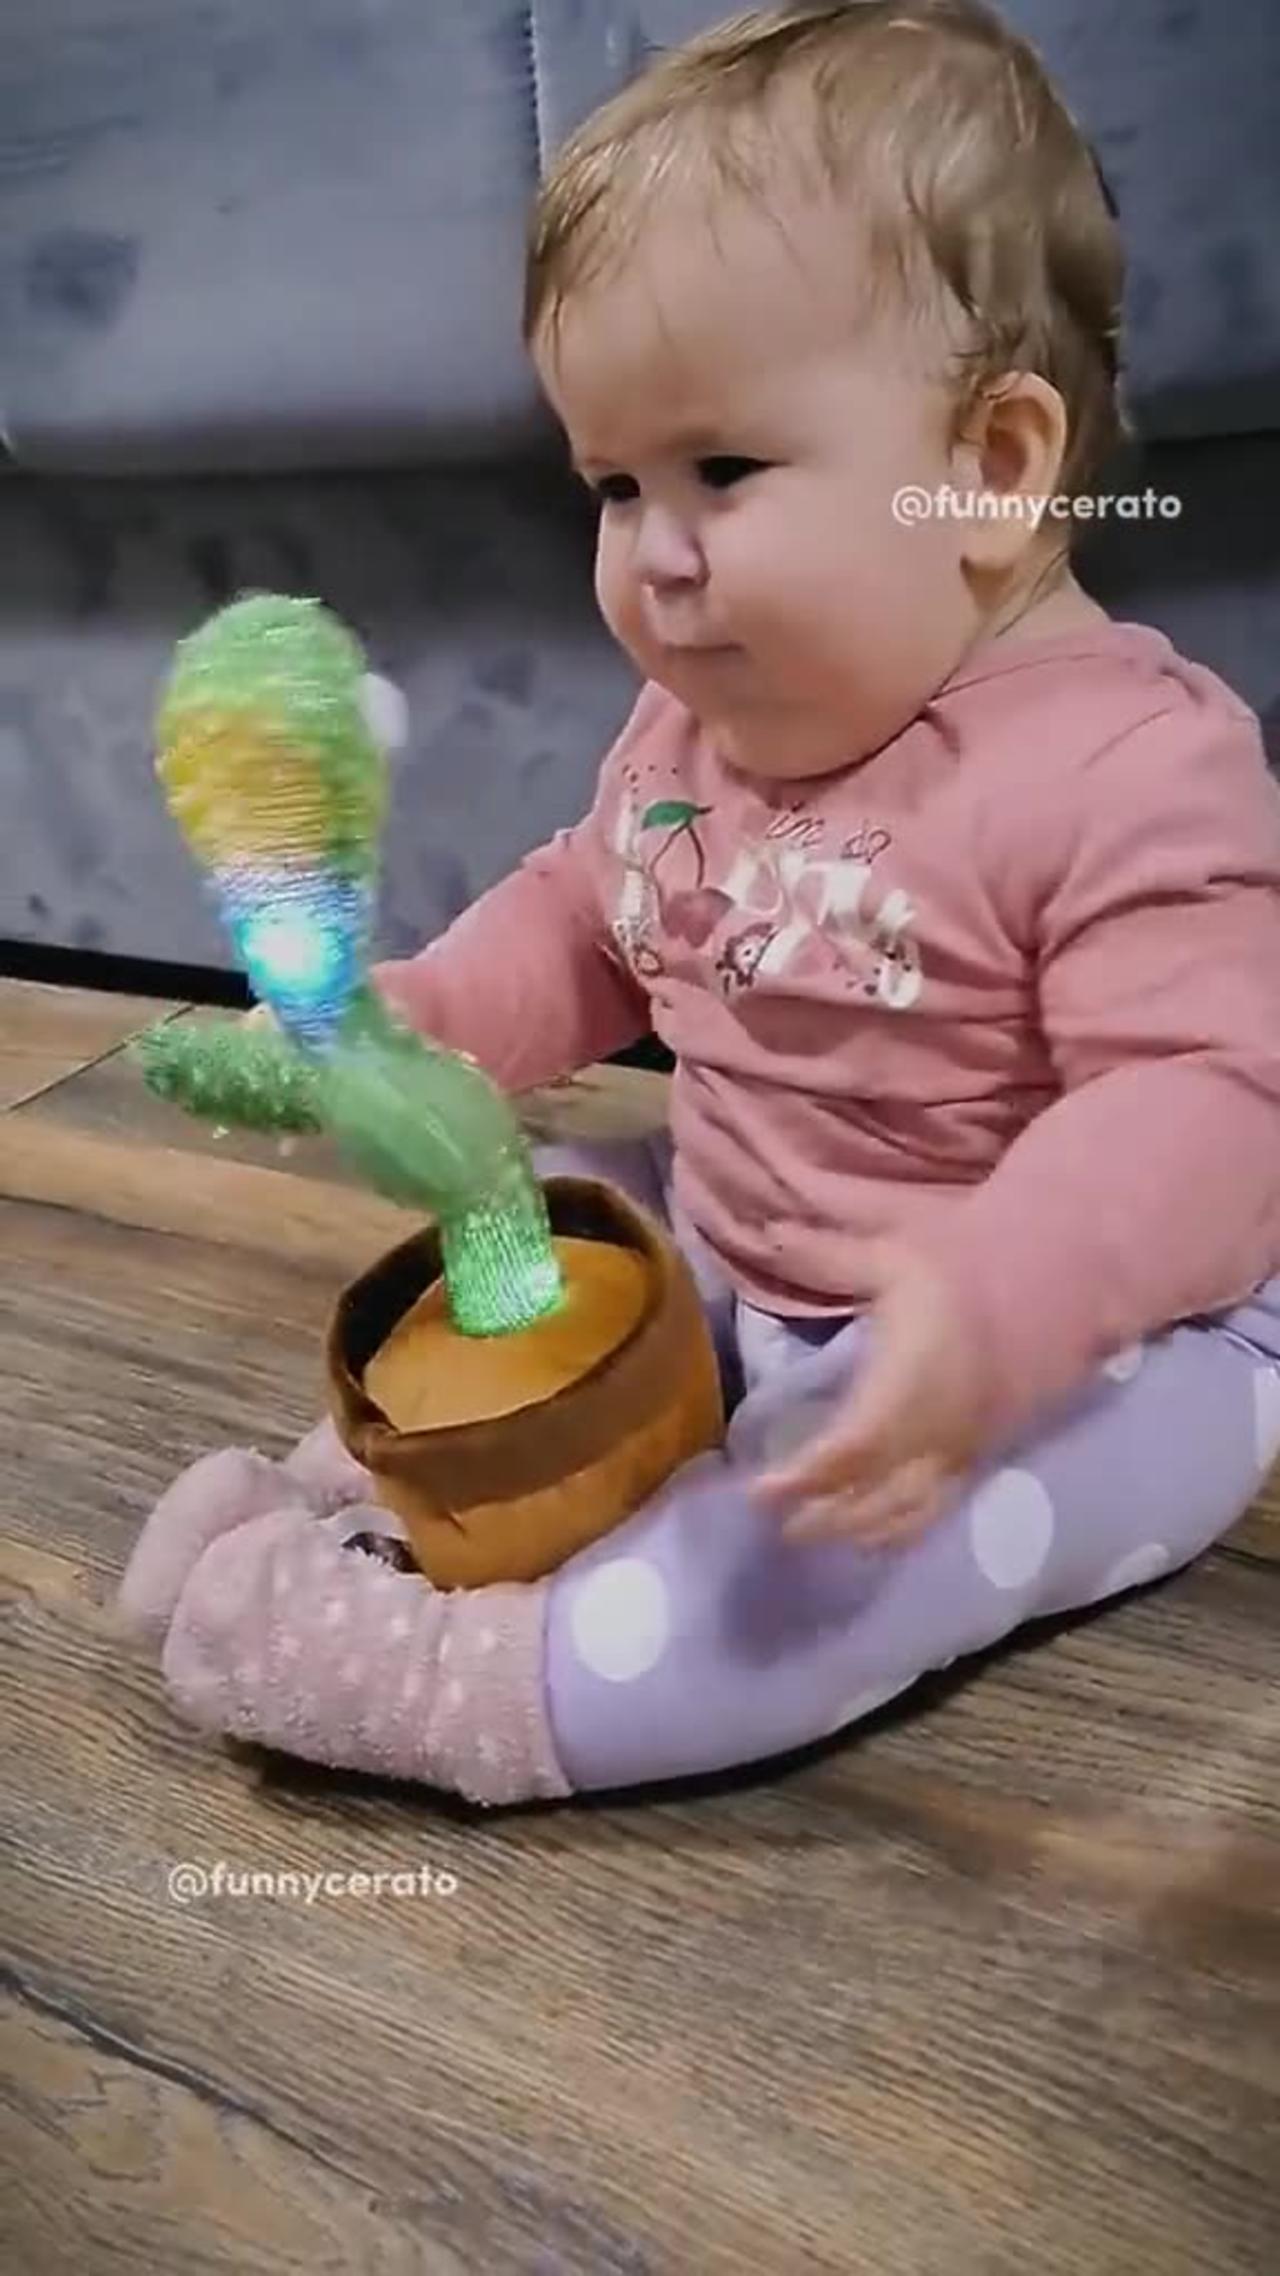 Baby with cactus toys